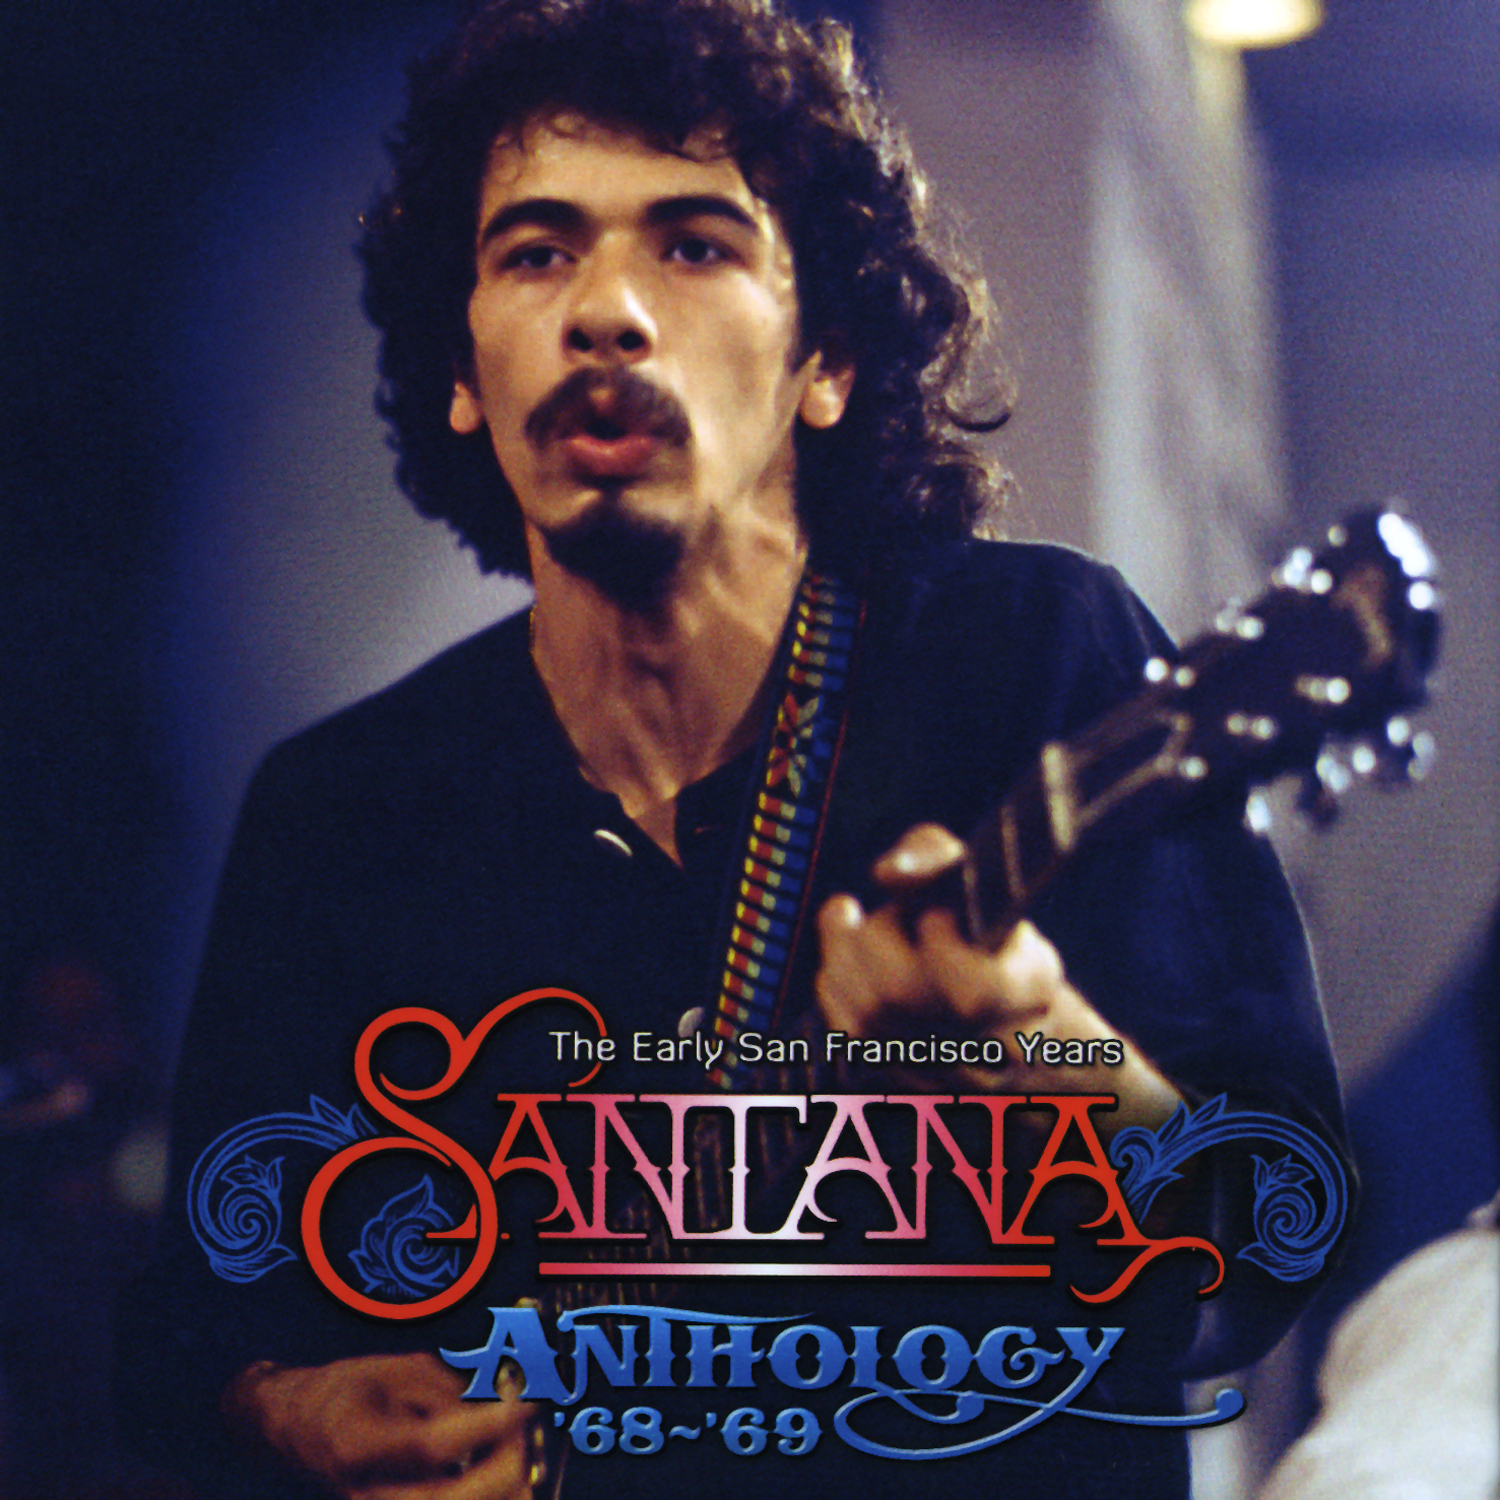 Free download santana early san francisco years cd cleopatra x for your desktop mobile tablet explore carlos santana wallpapers santana wallpaper carlos santana wallpaper carlos gonzalez wallpaper